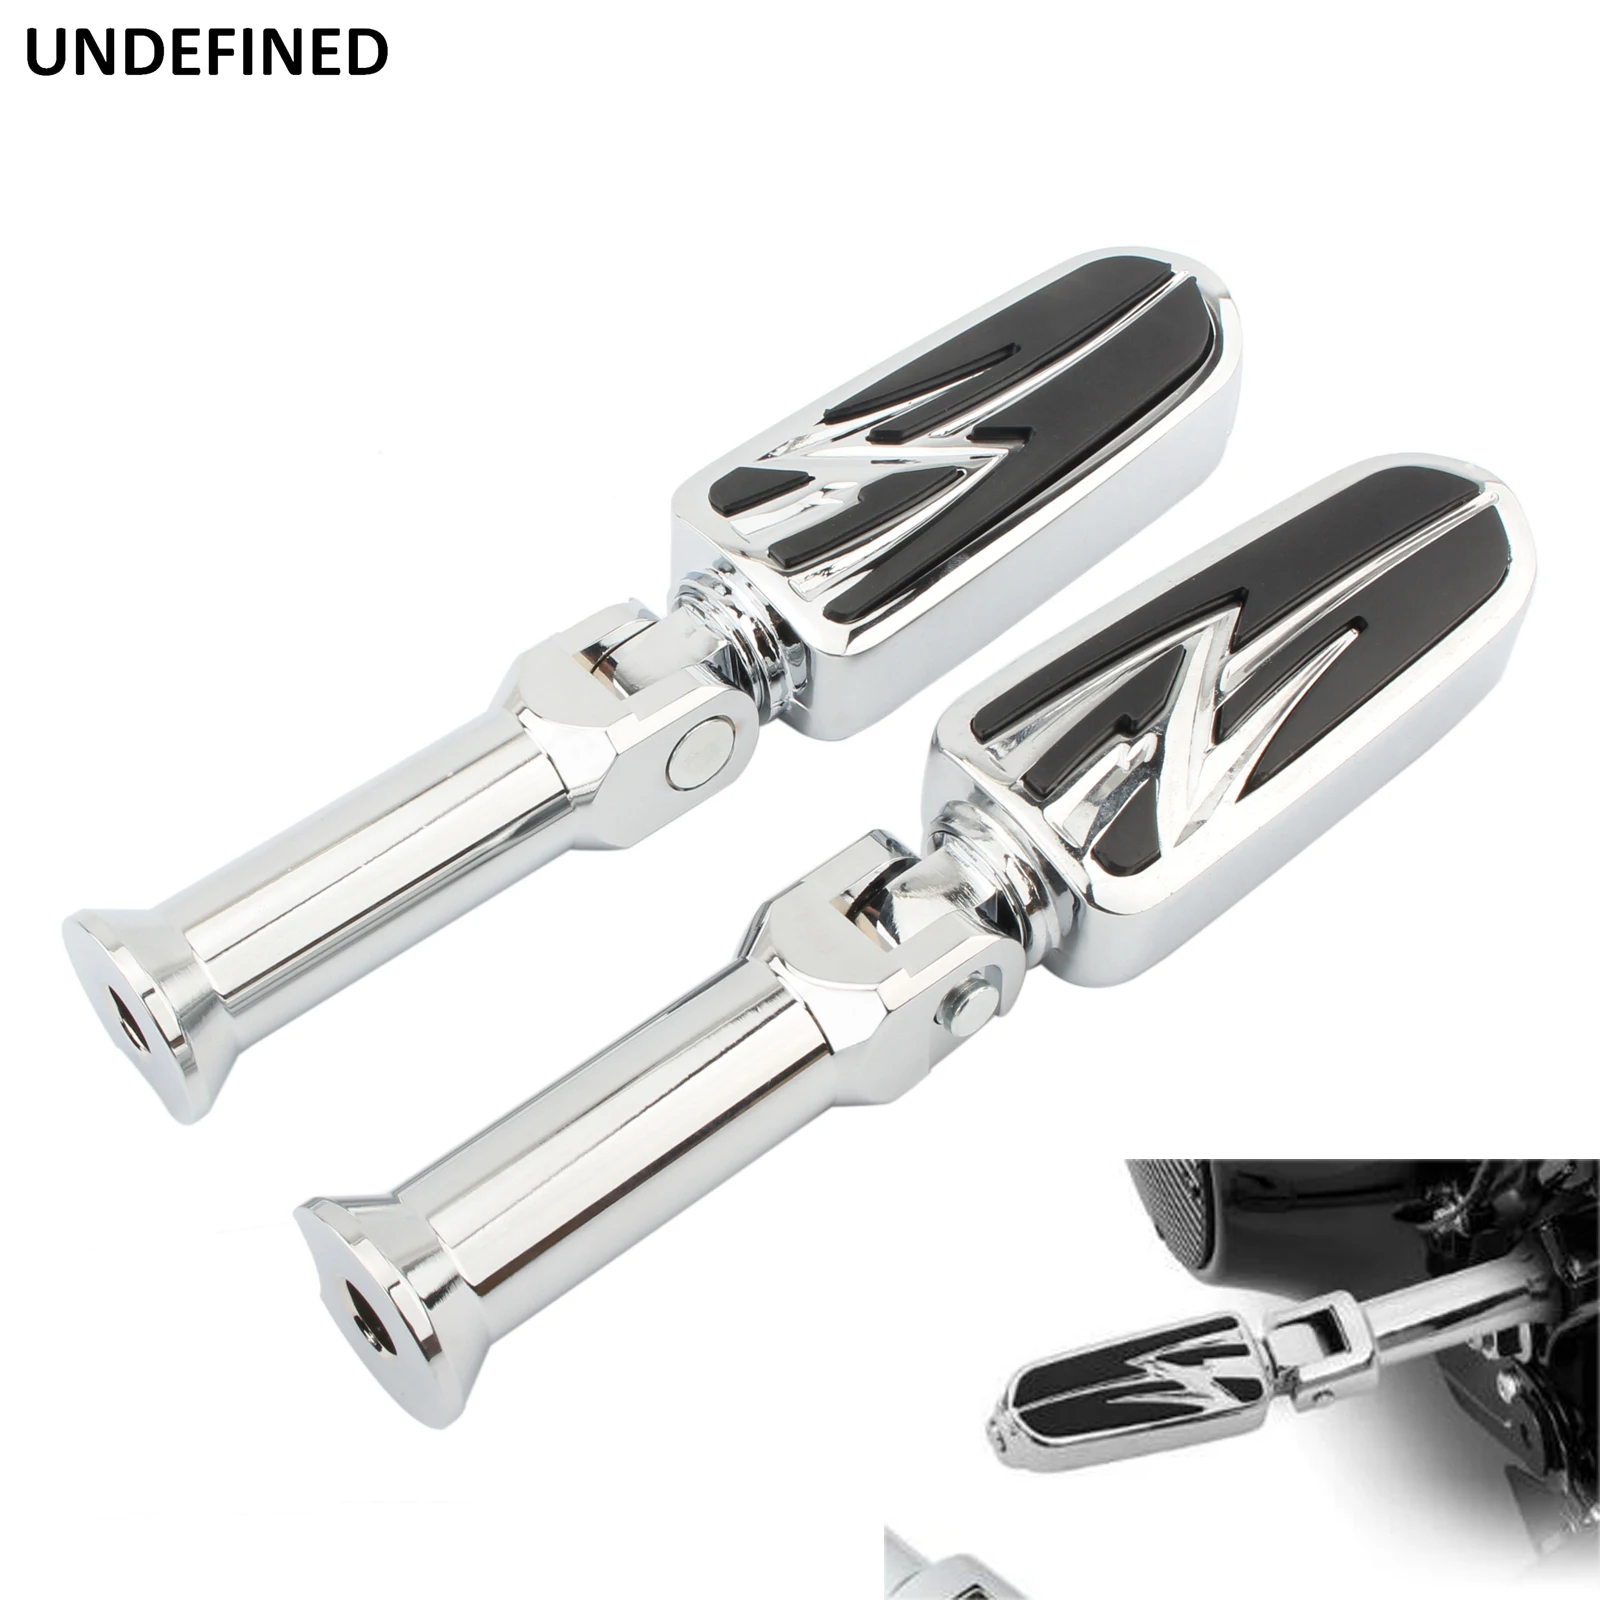 

Passenger Foot Peg Footrests Motorcycle Footpegs Support Clamps For Harley Softail Slim Deluxe Breakout FXDR 114 FLHCS 2018-2020